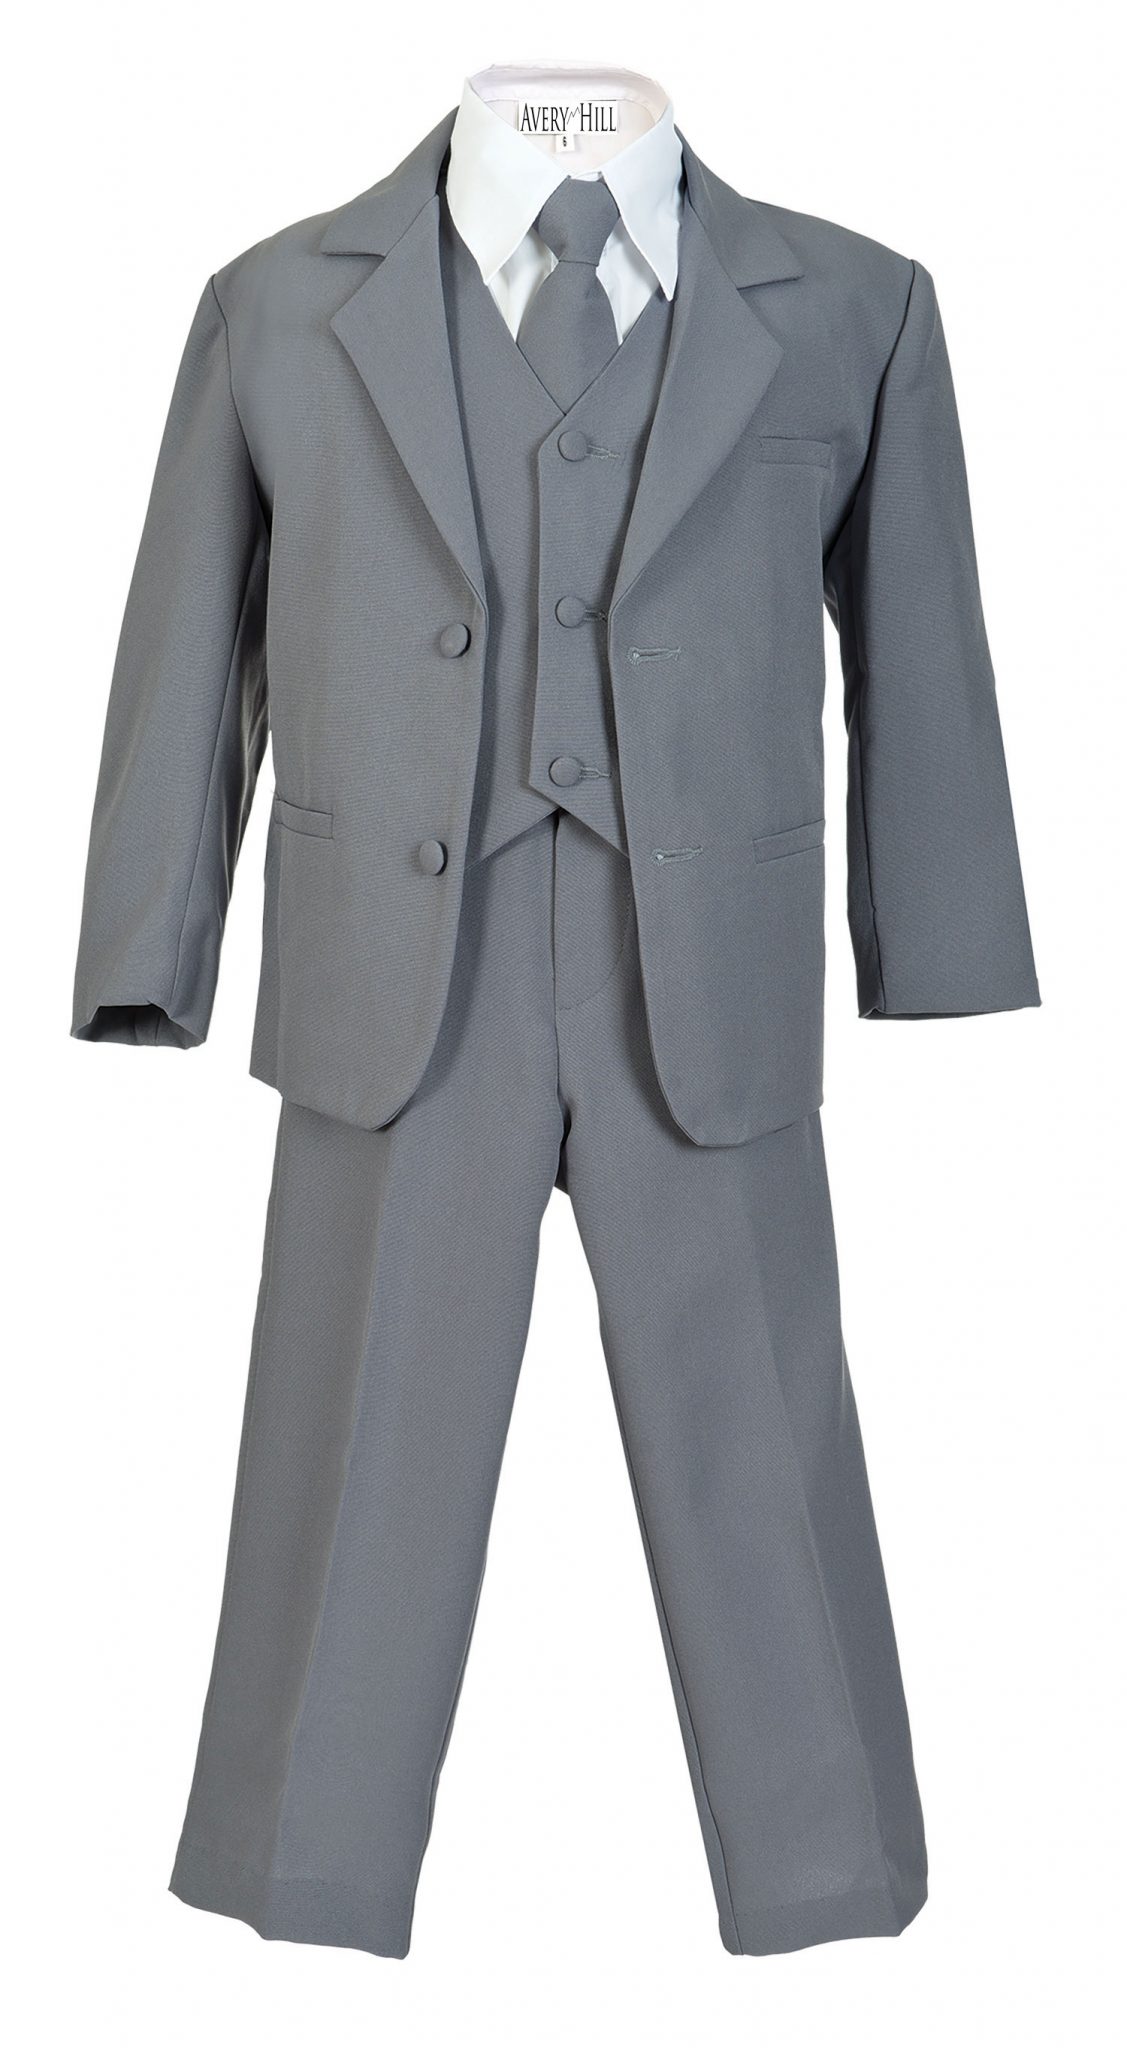 Avery Hill Boys Formal 5 Piece Suit with Shirt and Vest Slate Gray - 18